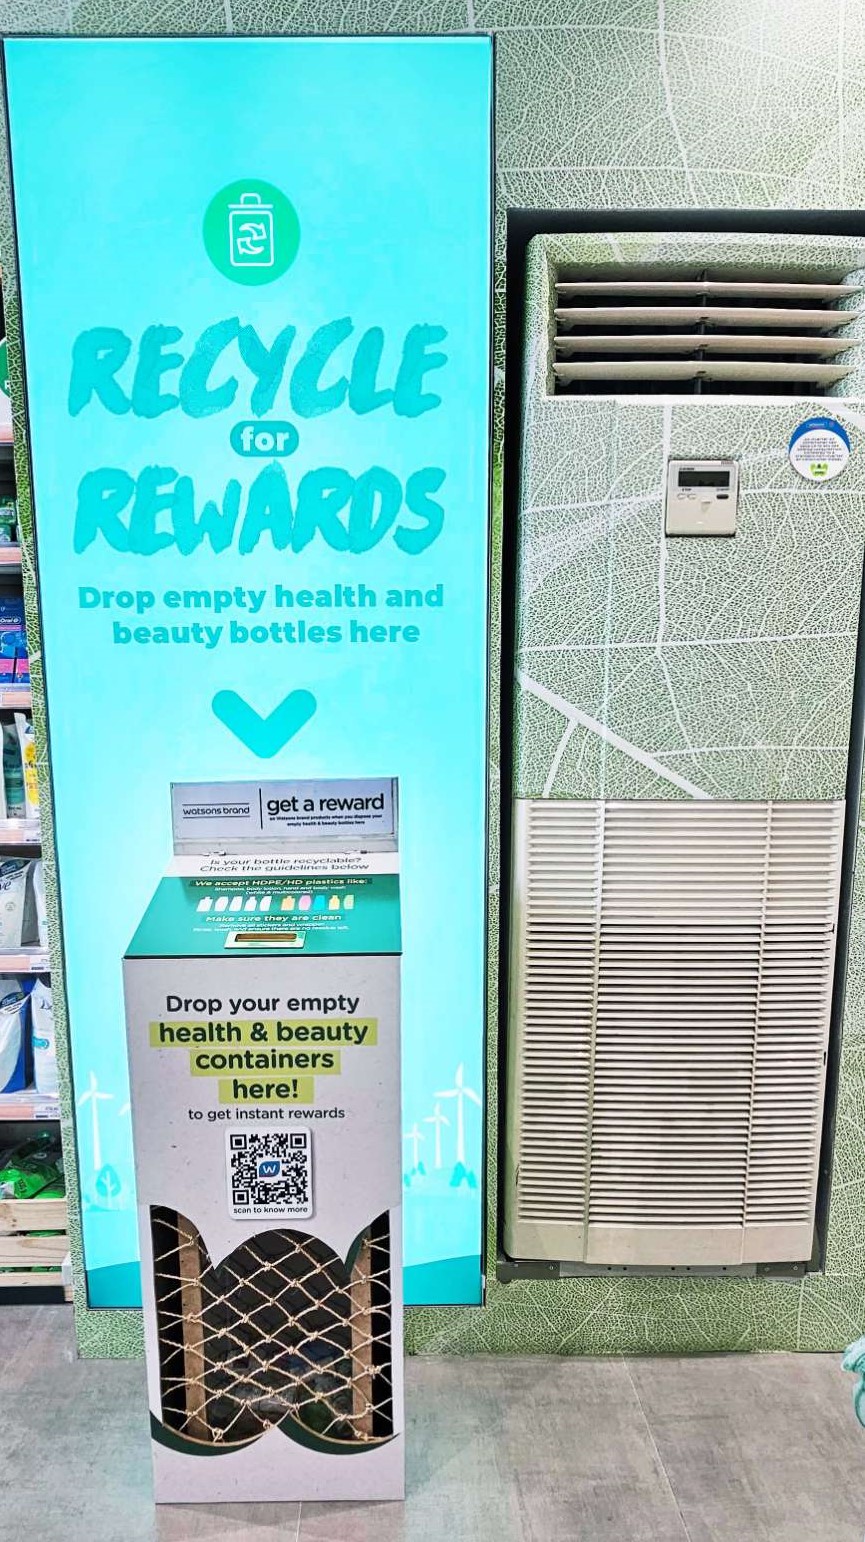 Watsons' Recycle for Rewards Program actively encourages shoppers to reduce waste, recycle more, and earn rewards for their environmentally-friendly actions.